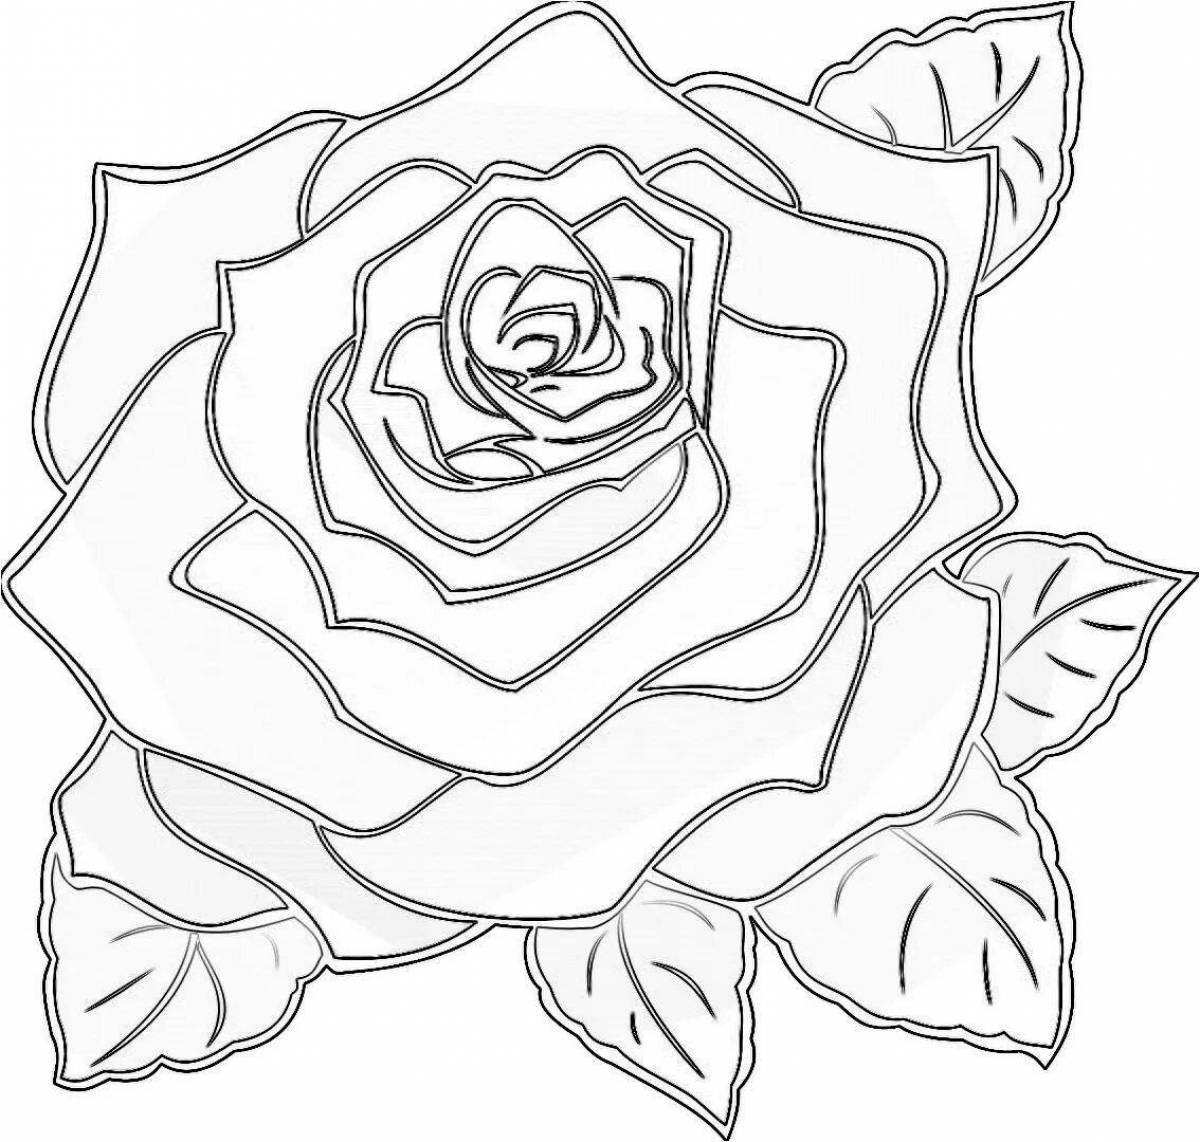 Playful rose coloring for girls